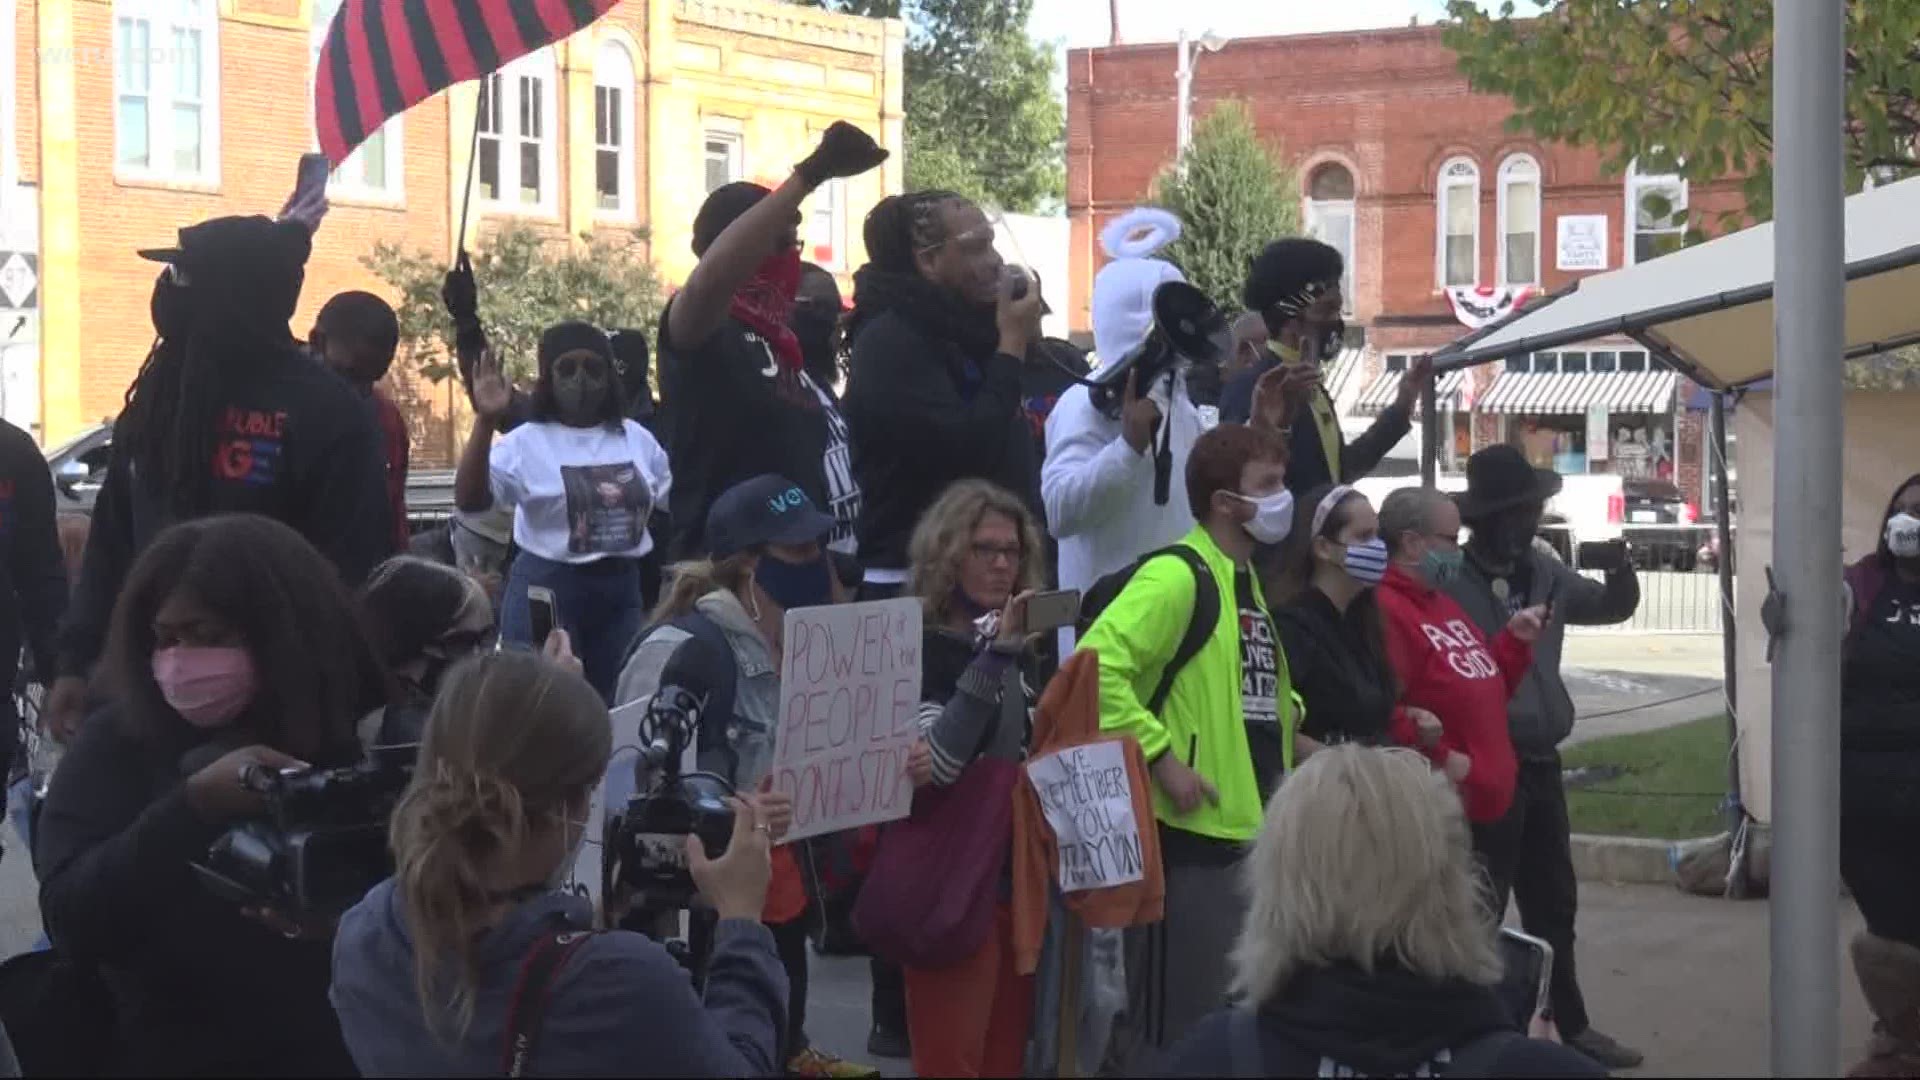 Officials said event organizer Rev. Gregory Drumwright was granted a permit to hold a rally on the grounds of the Alamance County Historic Courthouse.